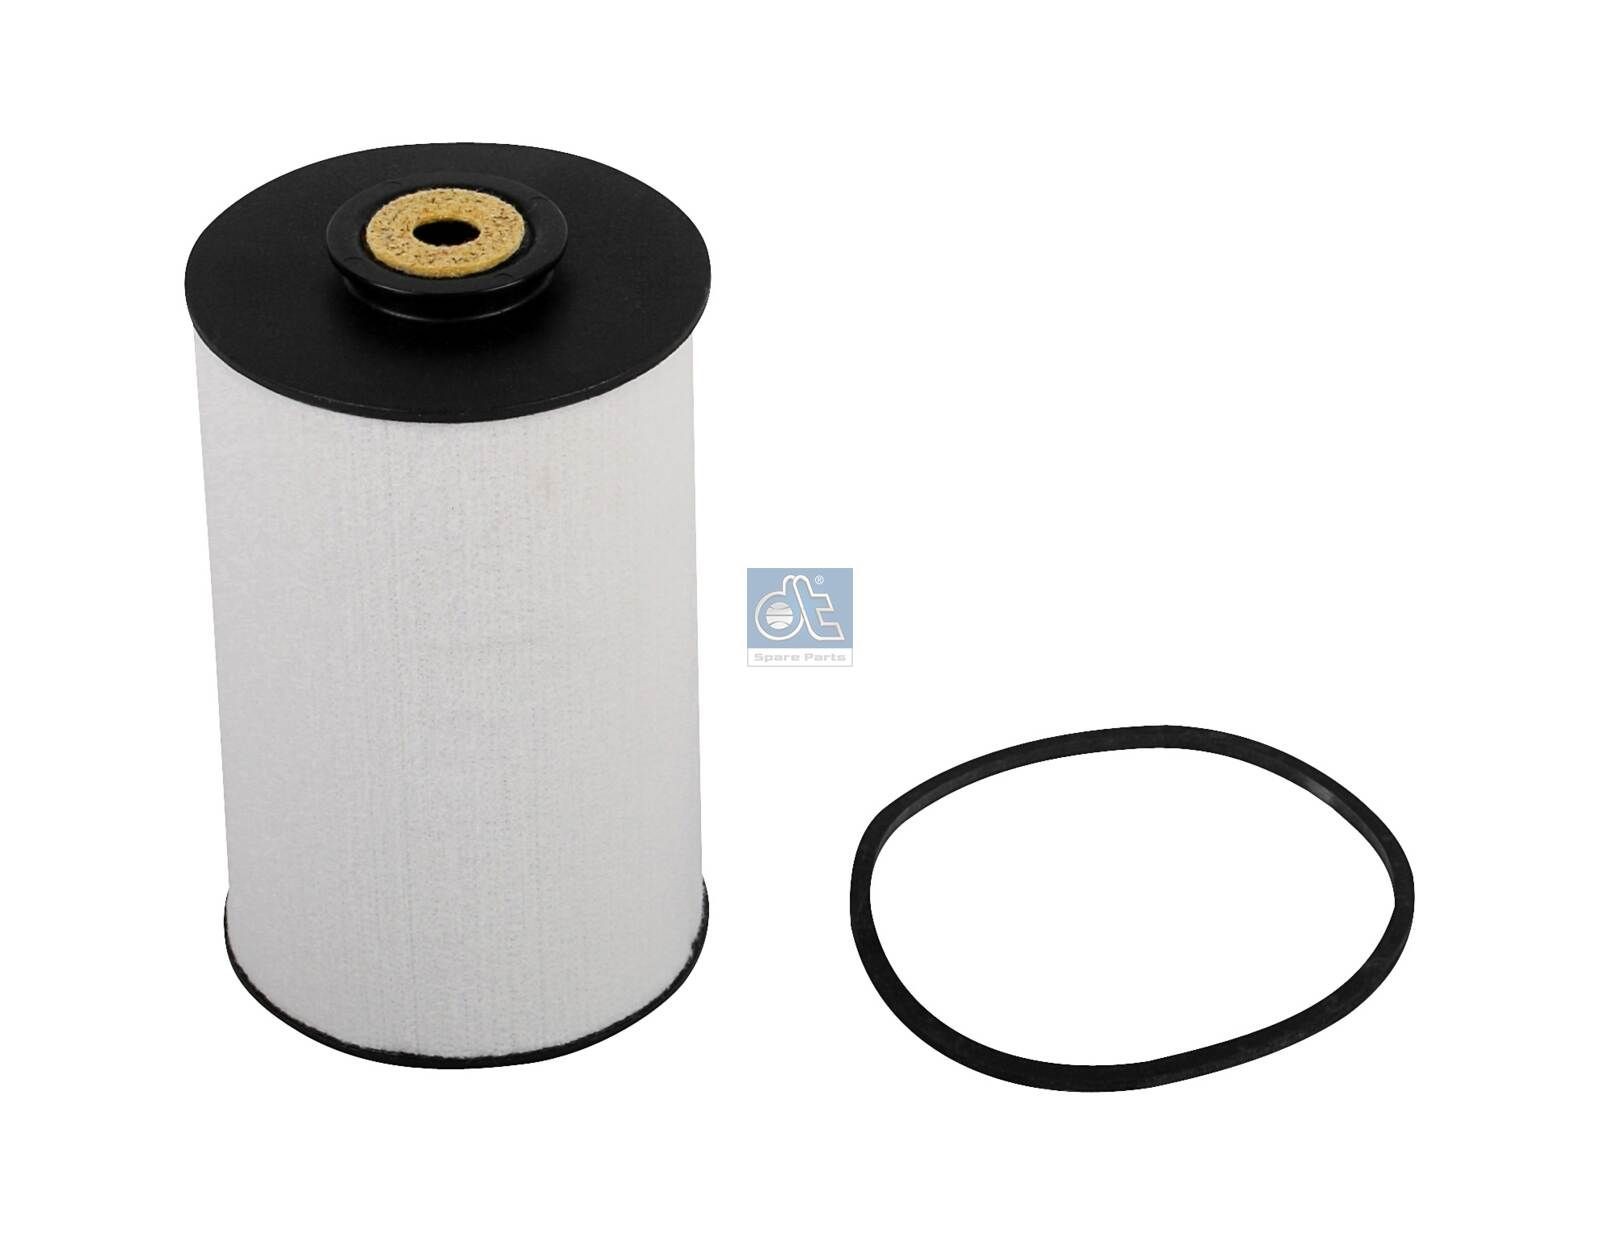 BFU 900 x DT Spare Parts 4.61531 Fuel filter 00 0133 602 1